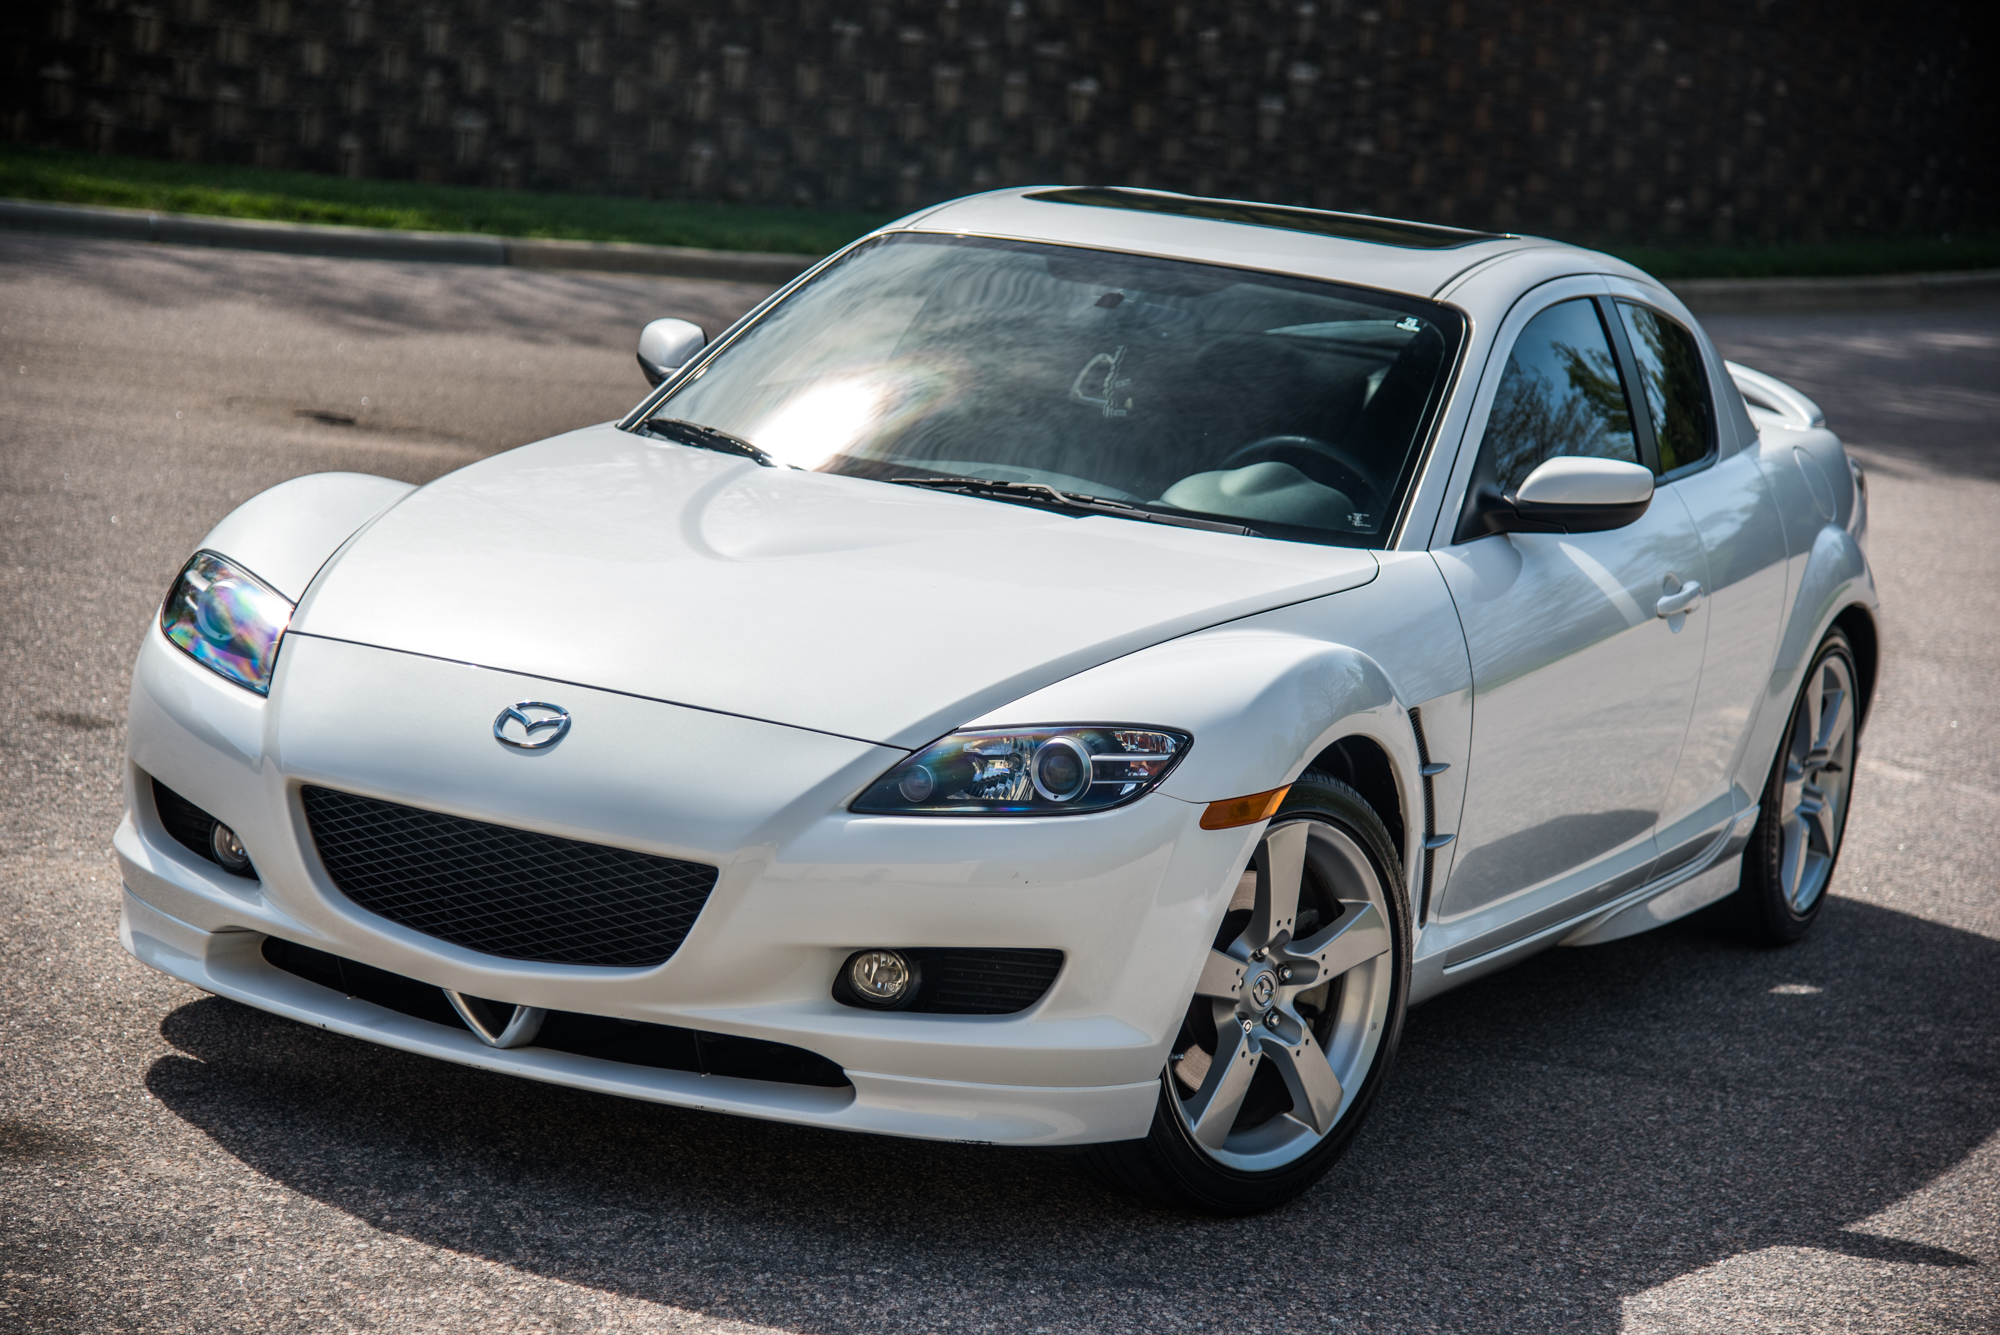 18k-Mile 2008 Mazda RX-8 6-Speed for sale on BaT Auctions - sold for  $14,075 on May 8, 2018 (Lot #9,503) | Bring a Trailer